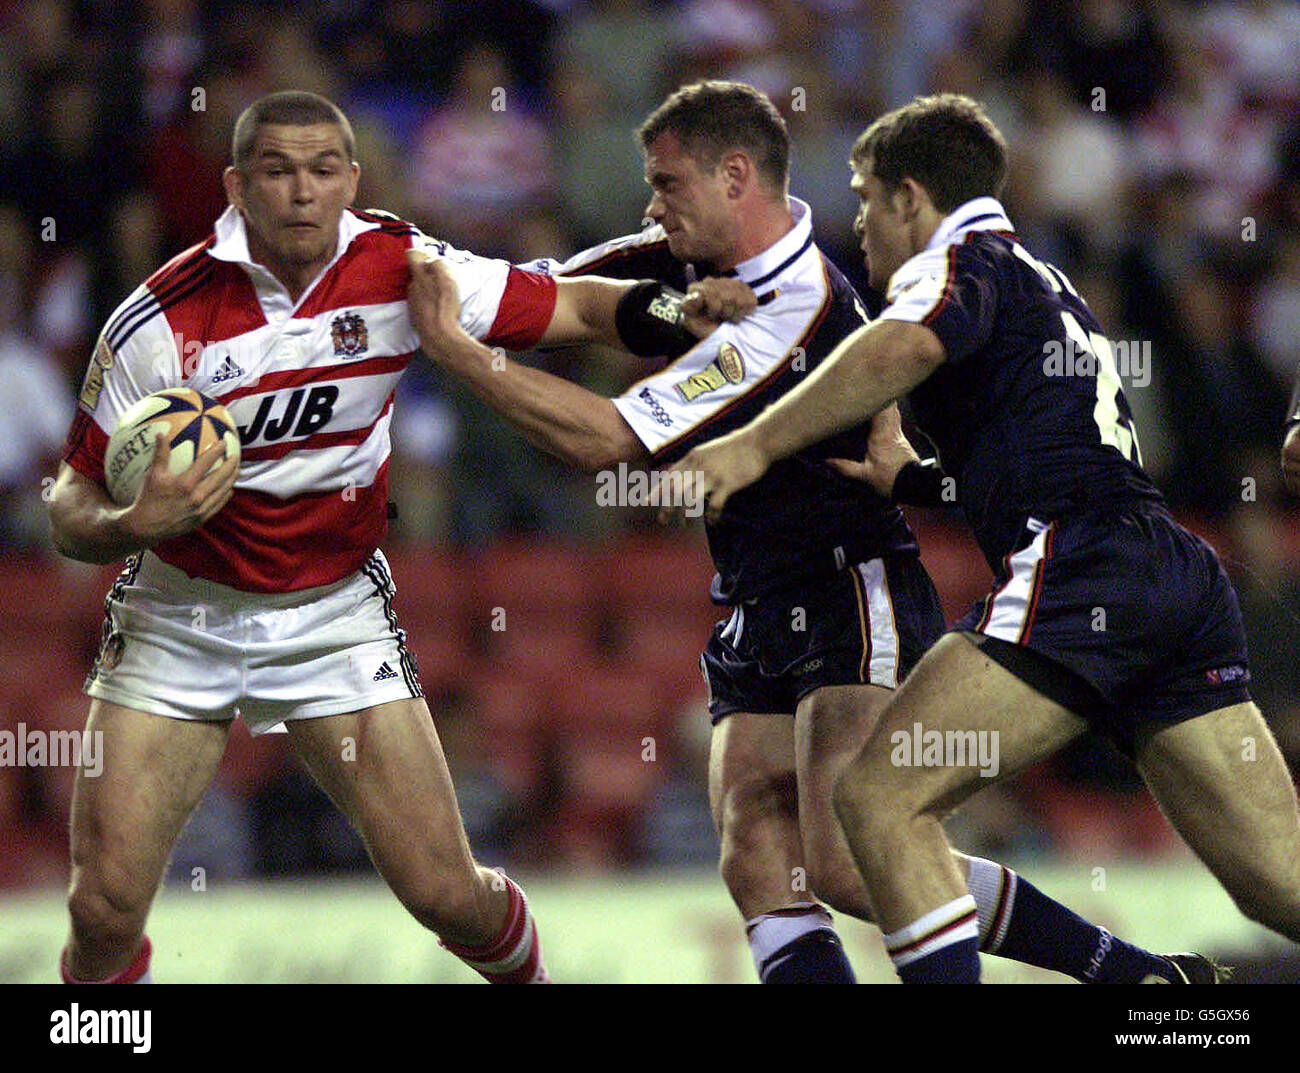 Wigan Warriors' Andrew Farrell trys to break Bradford Bulls' defensive line of Jamie Peacock and Stuart Fielden (far right) during the Tetley's Bitter Super League game at the JJB Stadium, Wigan. Stock Photo